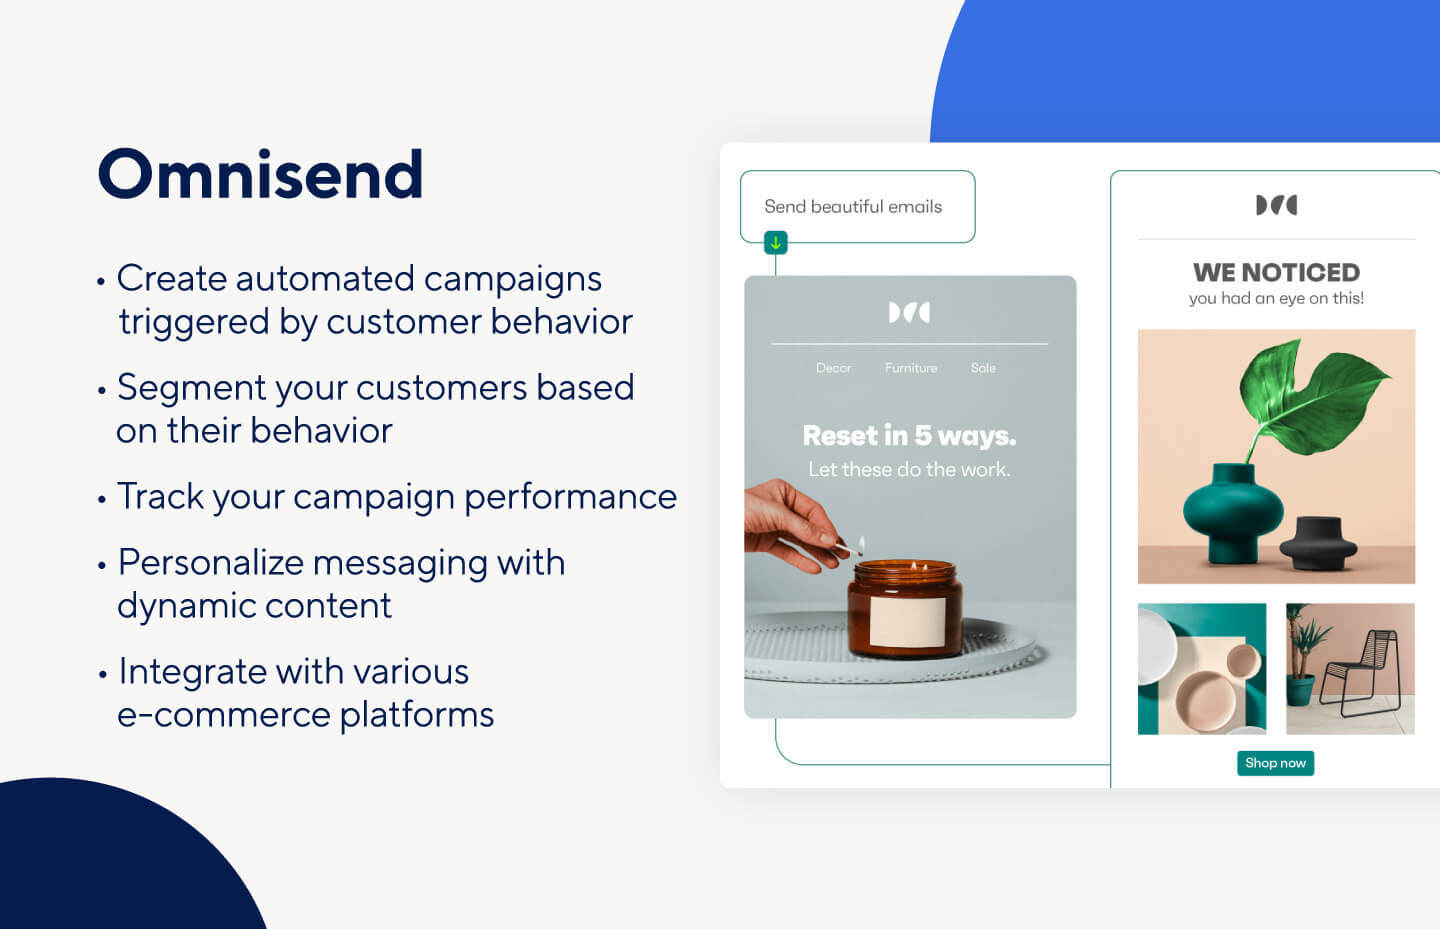 Omnisend is a digital marketing tool with integration and personalization options.